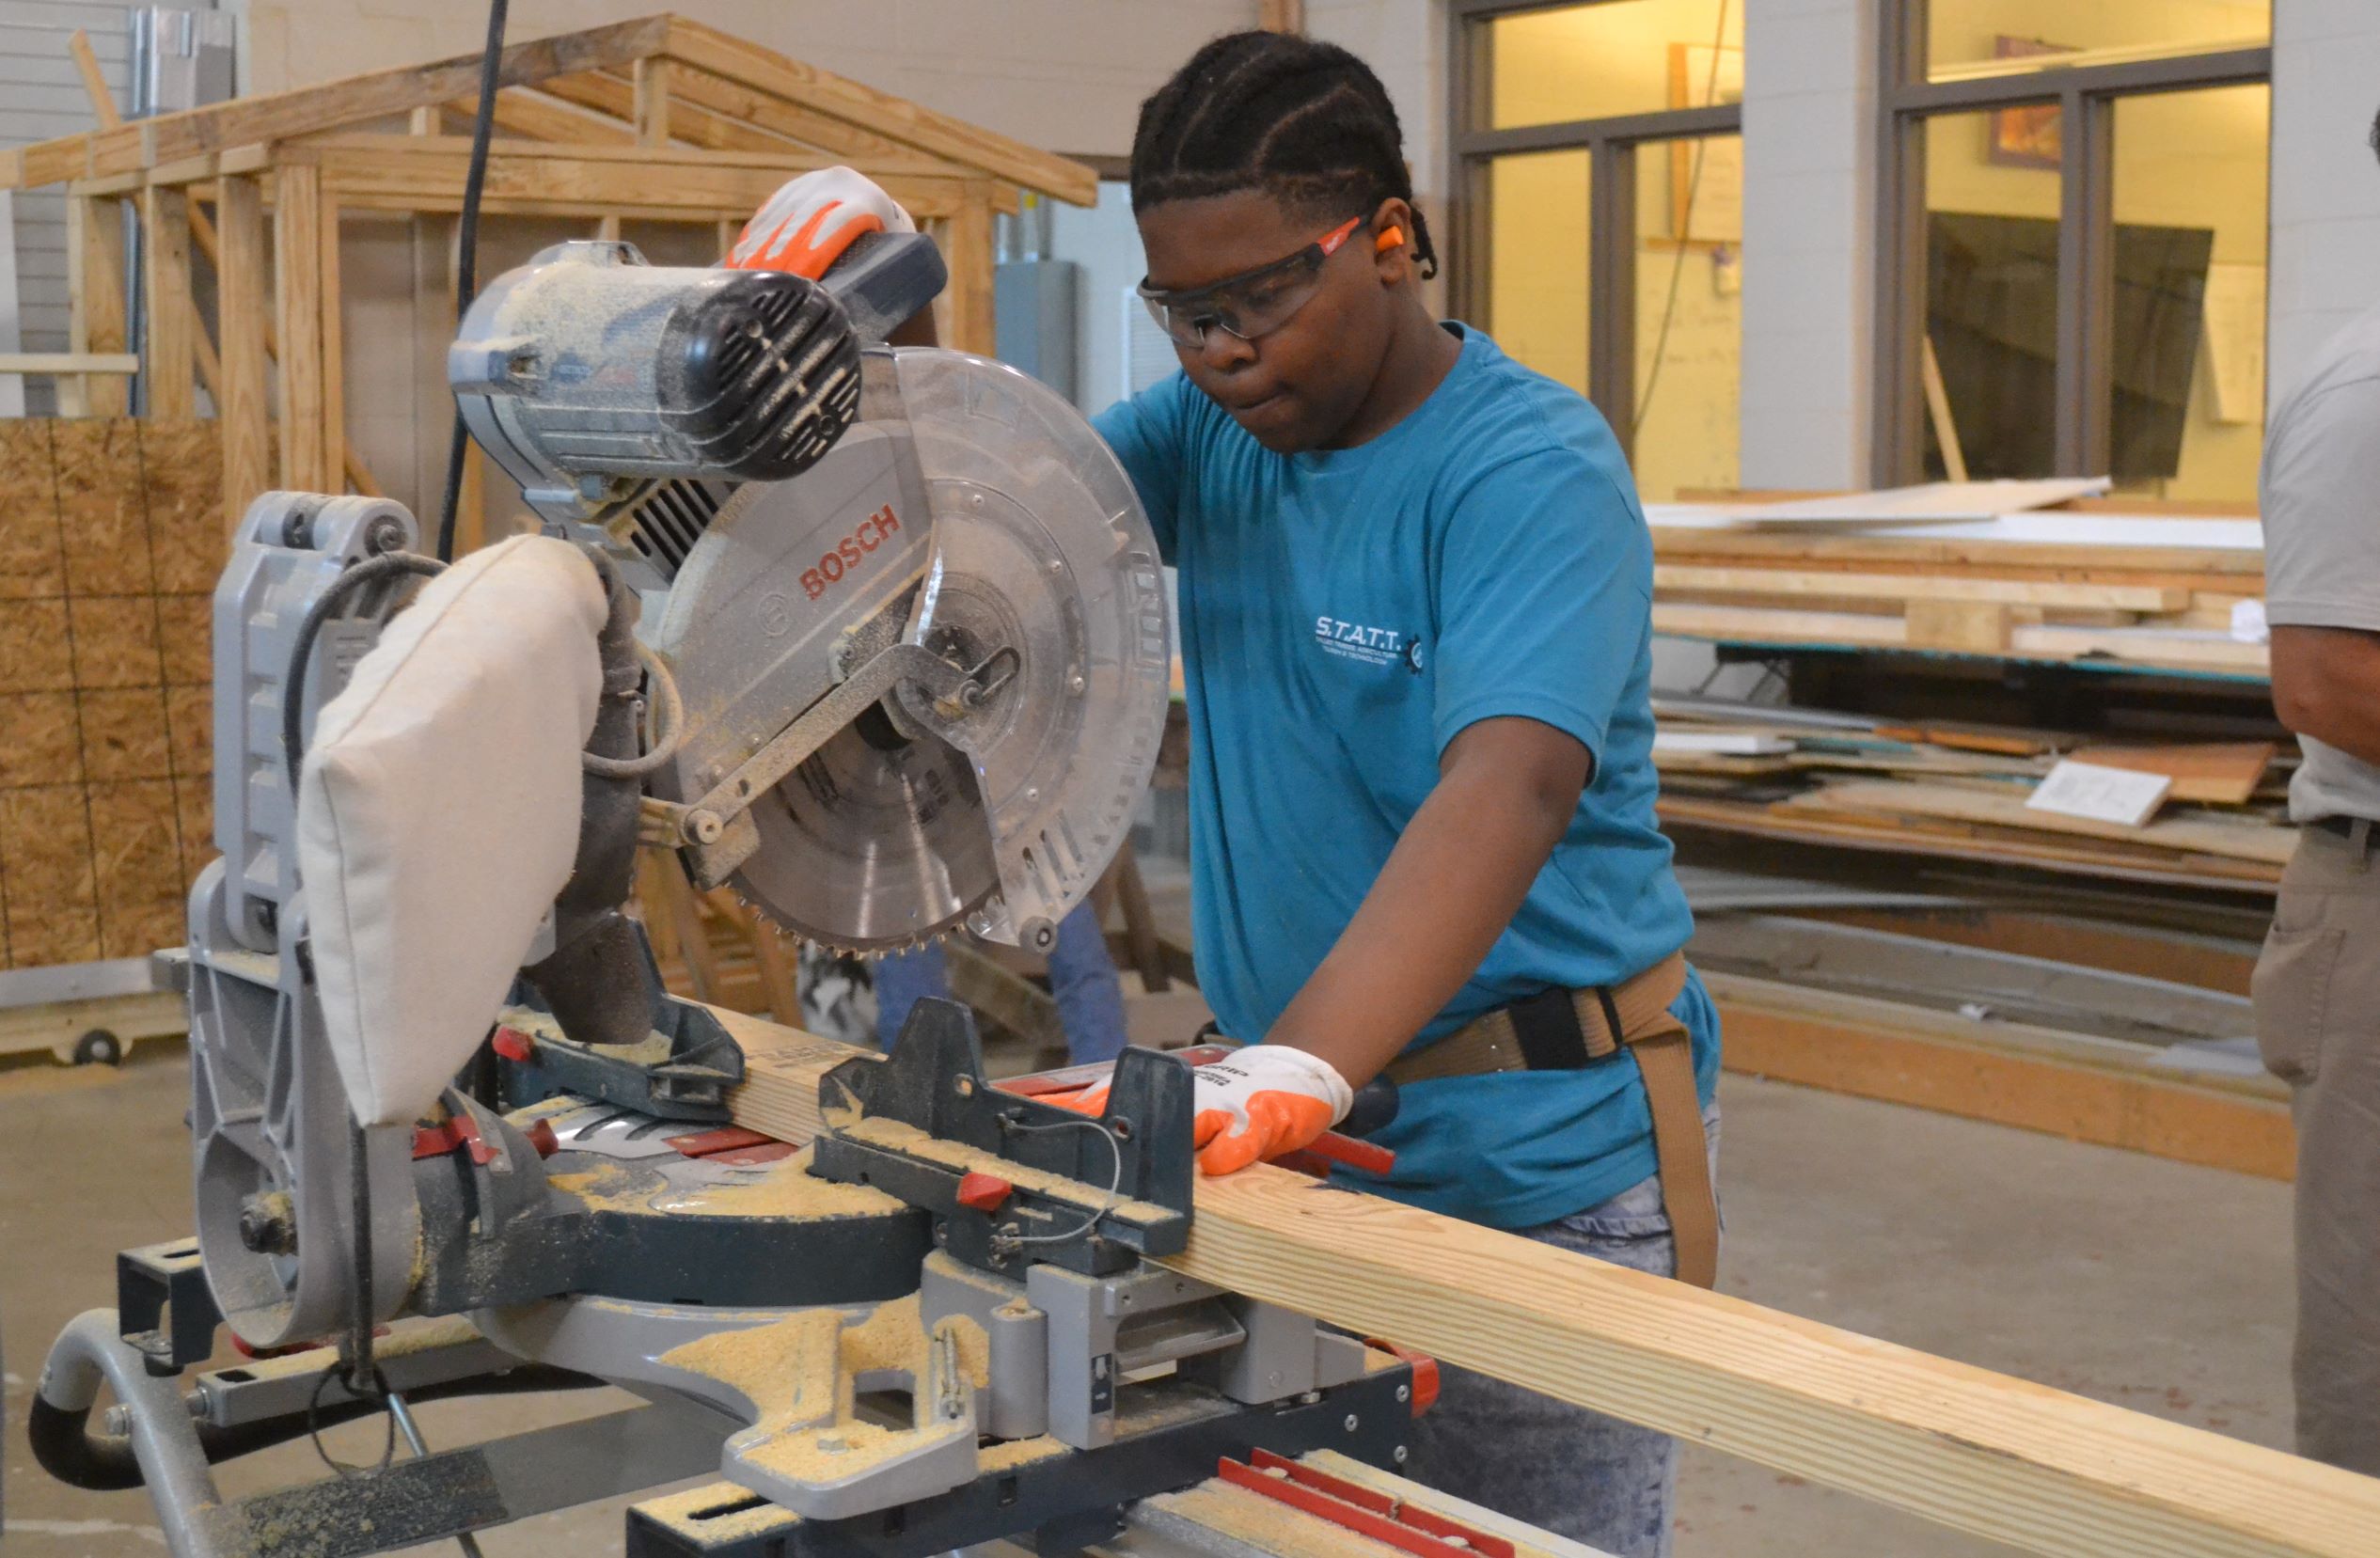 Summer Program Promotes Skilled Trades, Agriculture, Tourism and Technology